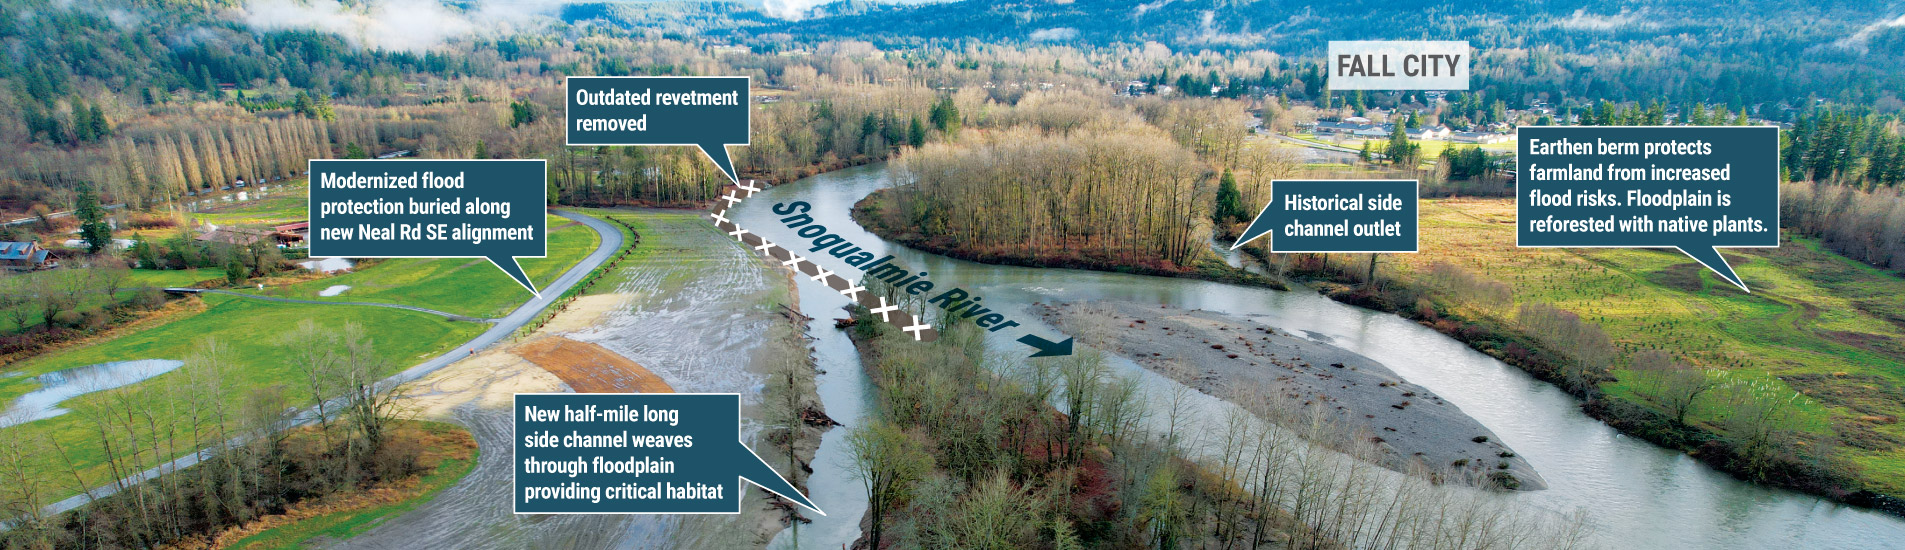 Aerial photo showing changes around the Haffener revetment along the Snoqualmie River including: the outdated revetment removed, modernized flood protection buried along new Neal Rd. SE alignment, new half-mile long side-channel weaves through floodplain providing critical habitat, historical side channel outlet and earthen berm protects farmland from increased flood risks. Floodplain is reforested with native plants.